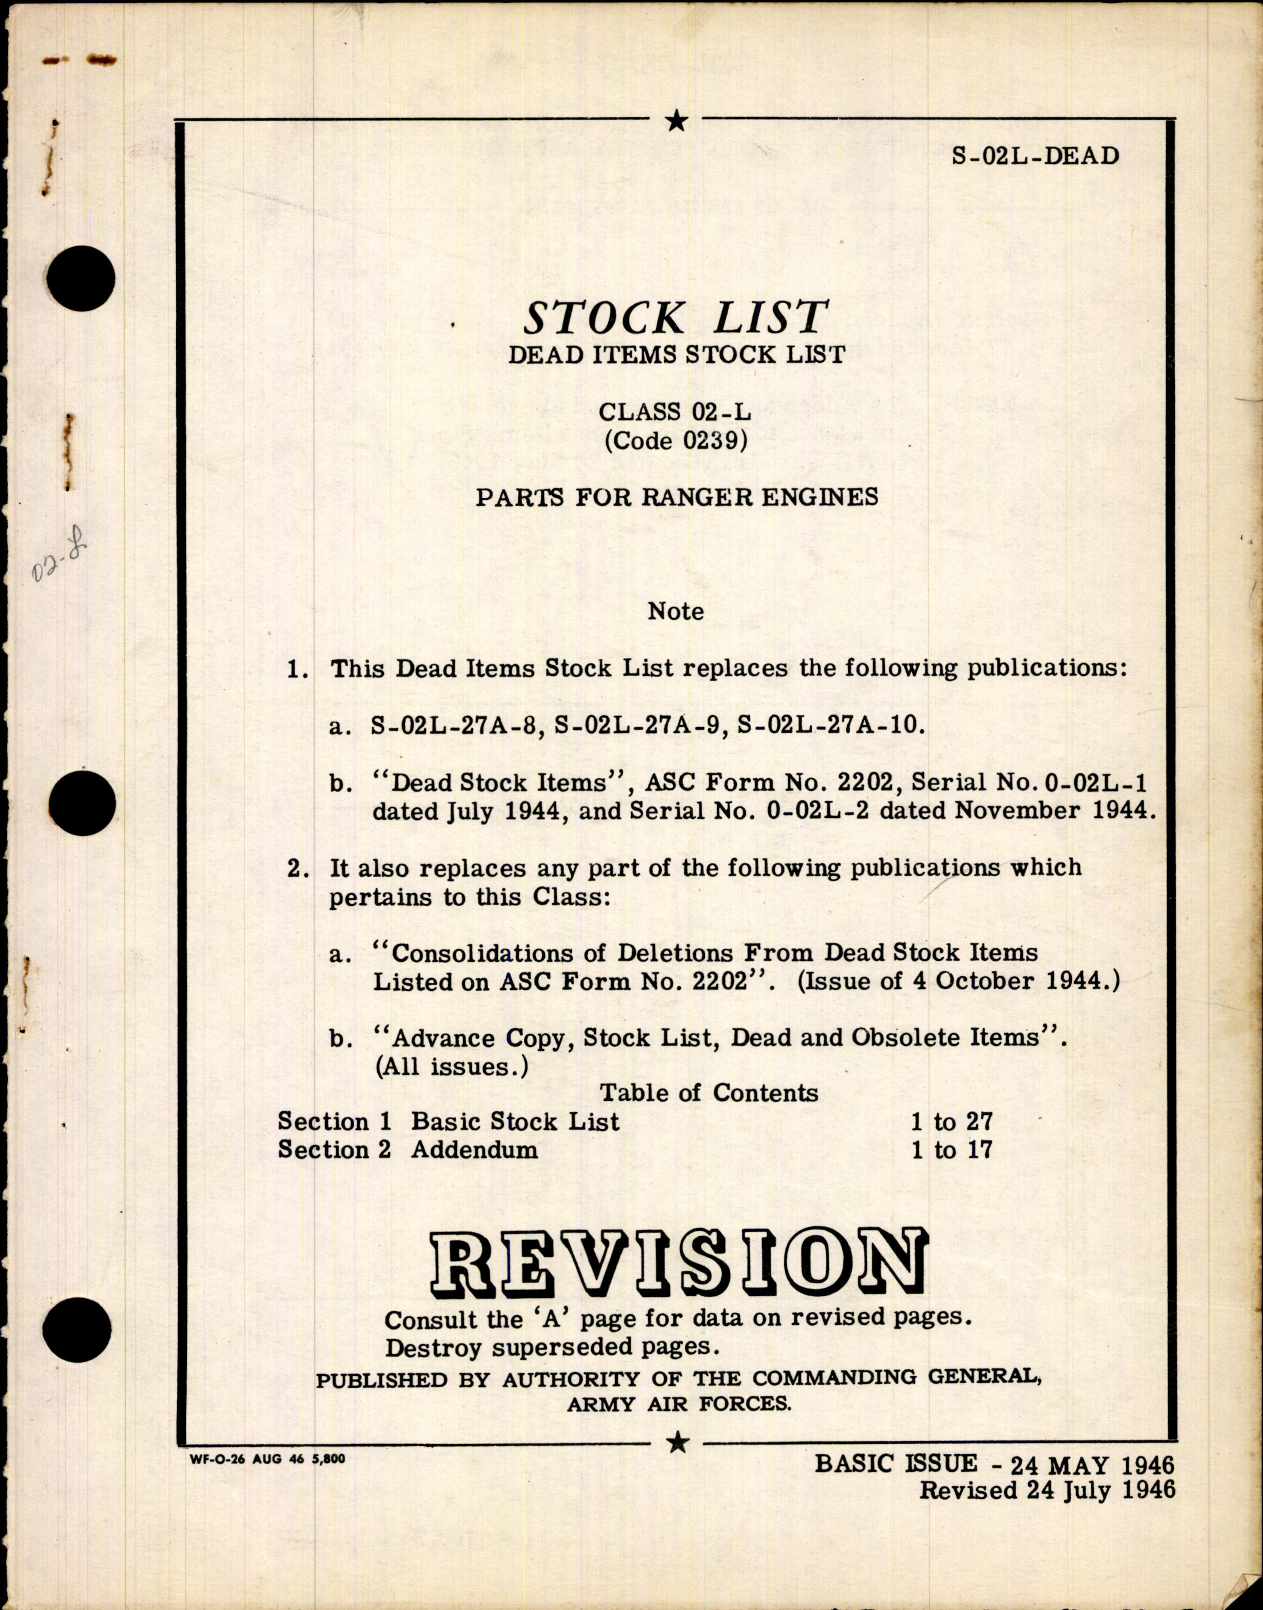 Sample page 1 from AirCorps Library document: Dead Items Stock List, Parts for Ranger Engines